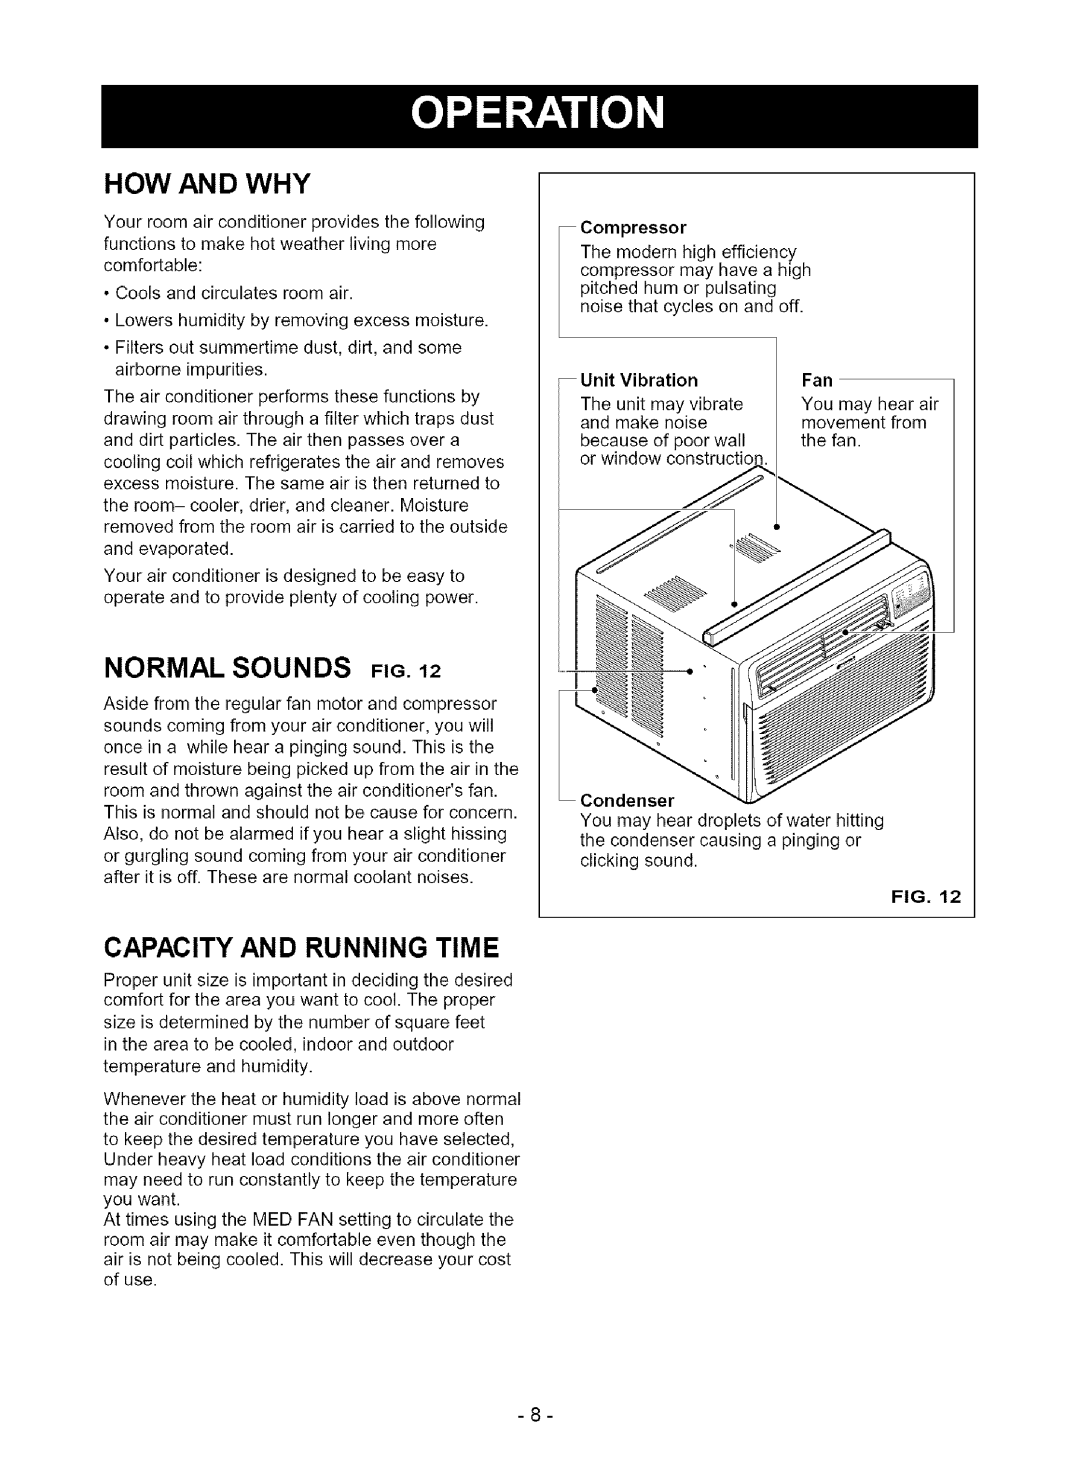 Kenmore 580.75080 owner manual How And Why, Normal Sounds, Capacity And Running Time, Unit Vibration 